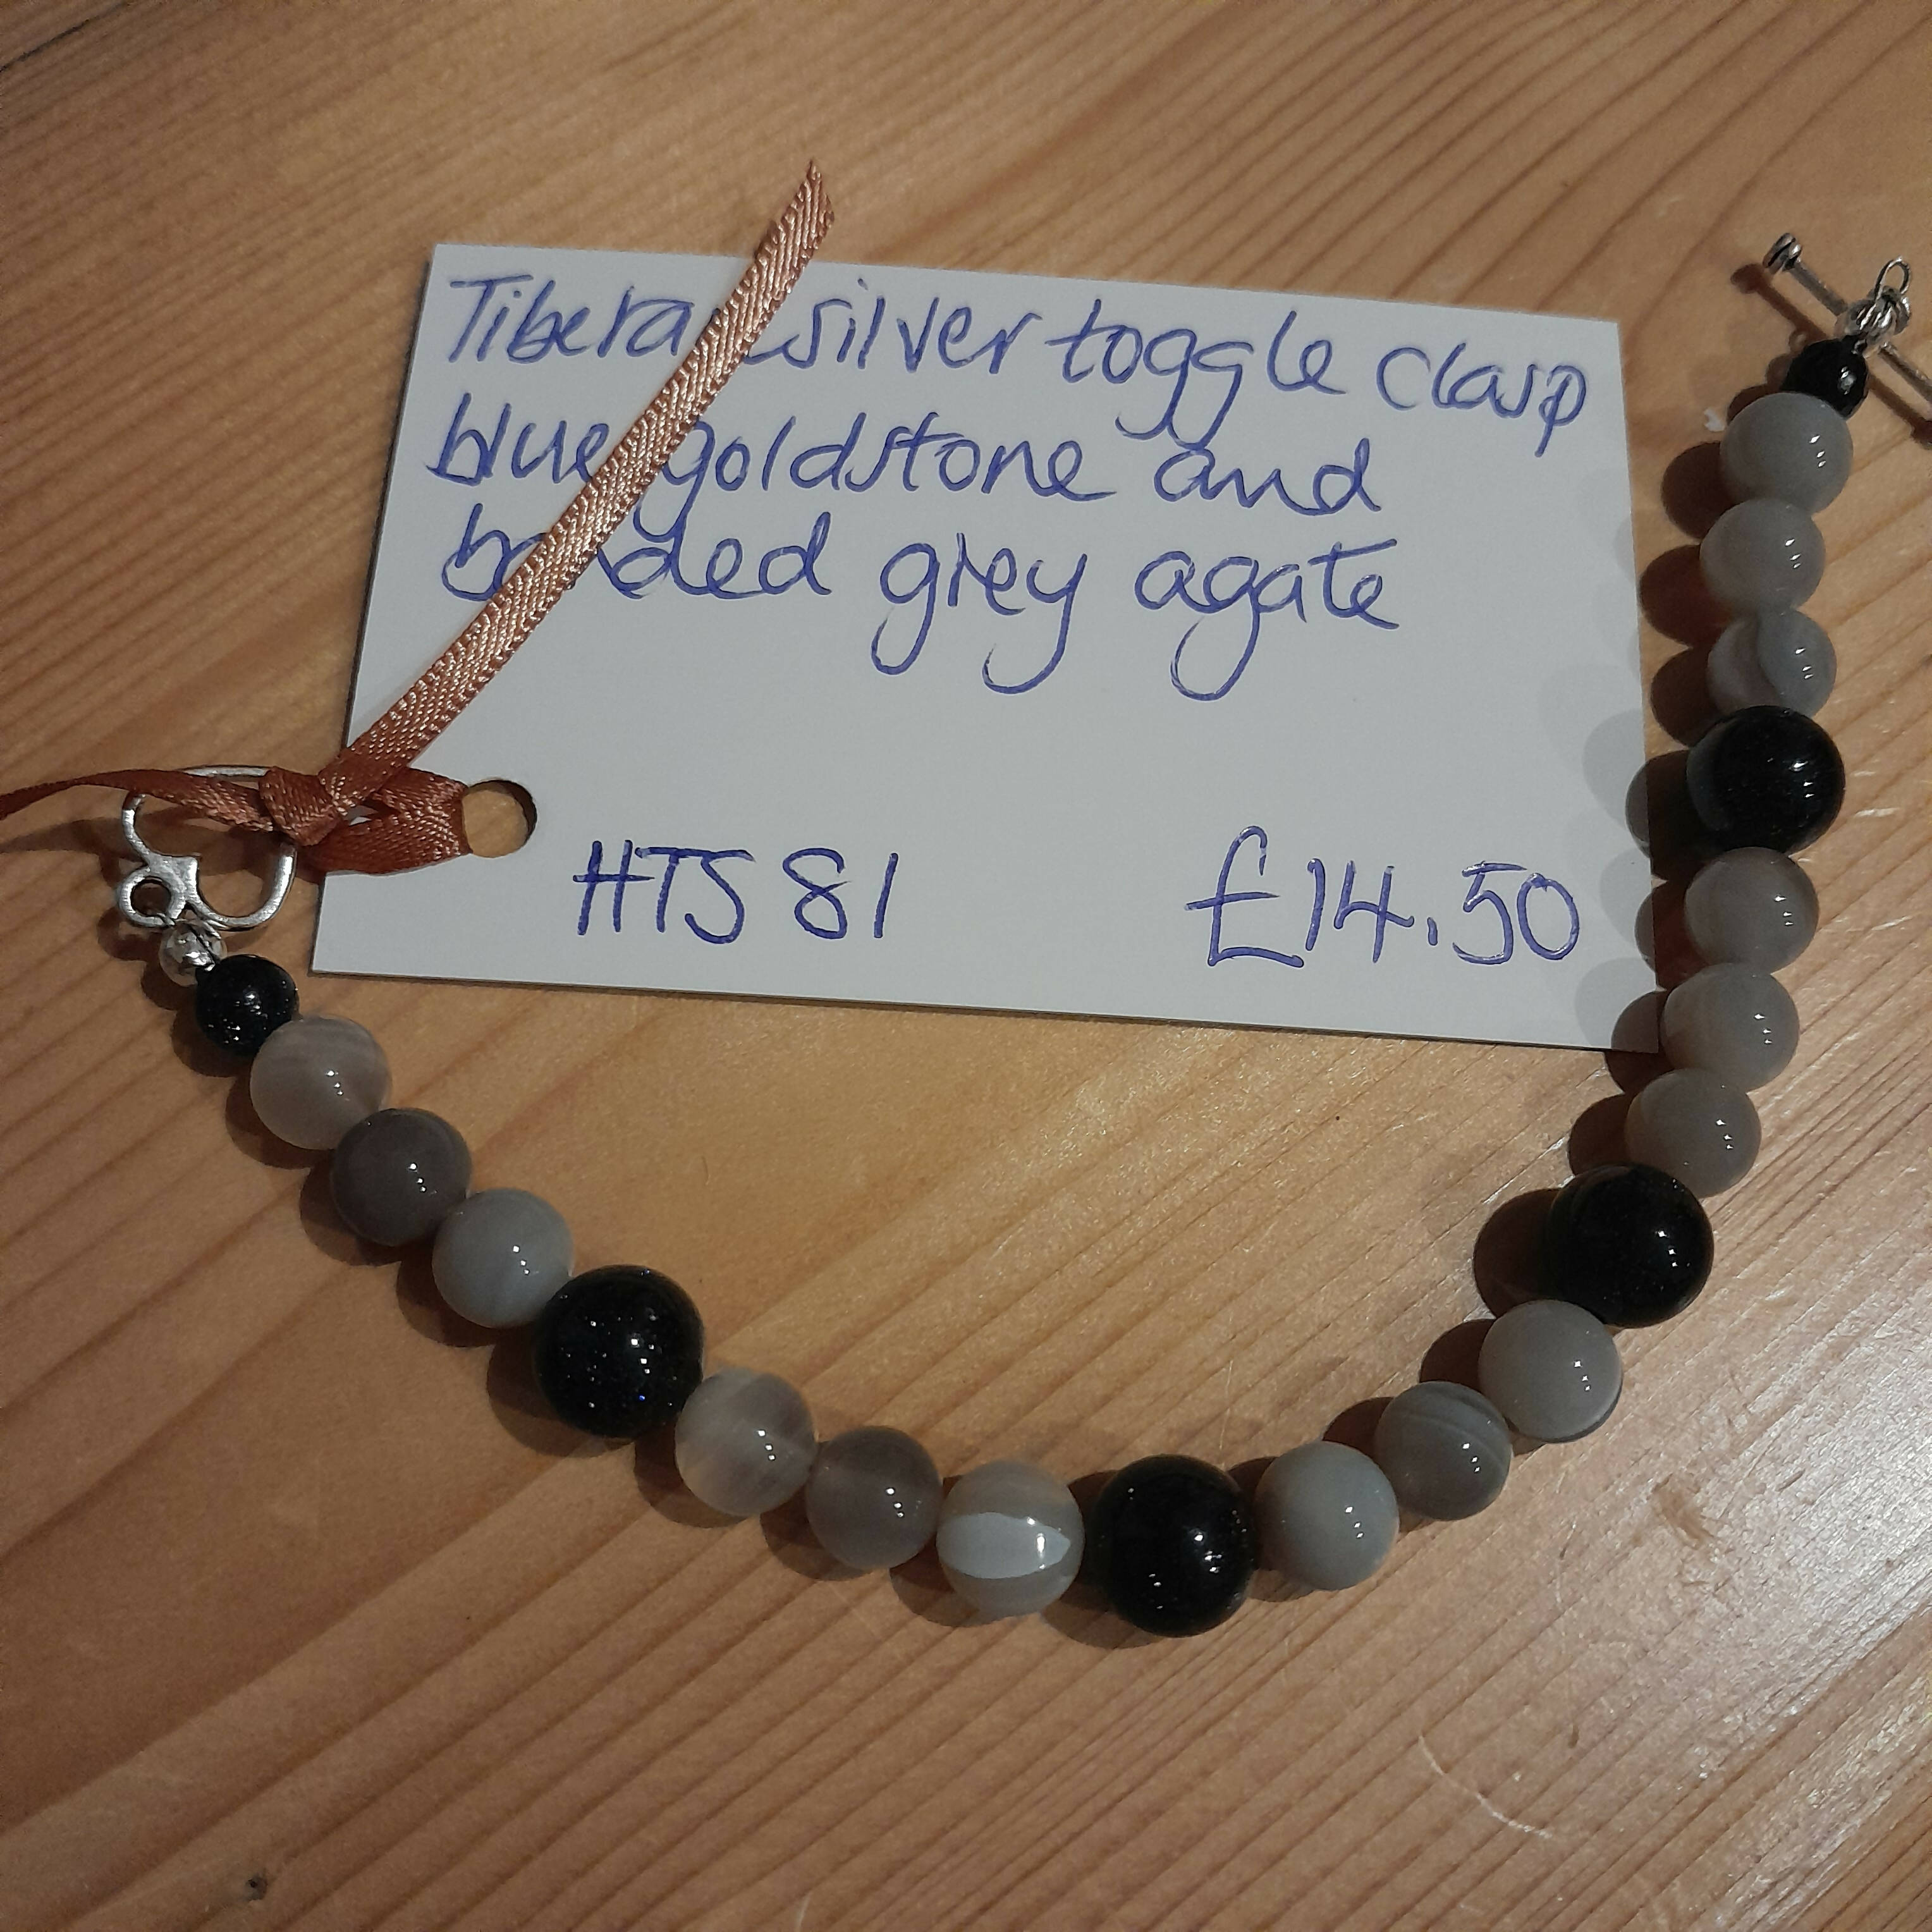 Tibetan Silver Toggle Clasp Bracelet with Blue Goldstone and Banded Grey Agate